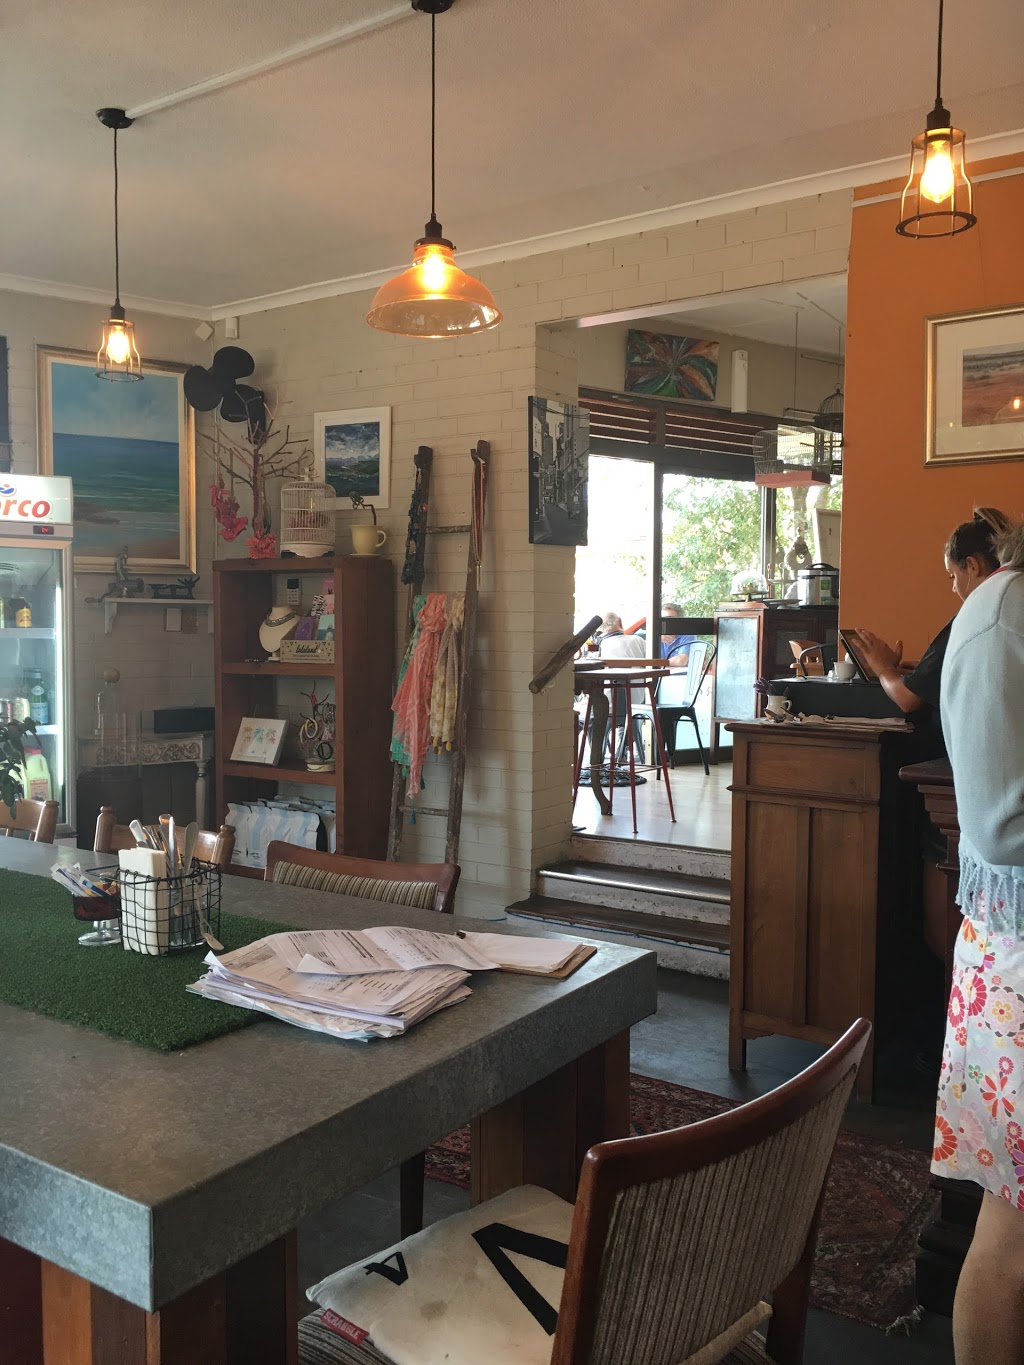 Two Birds Gallery Cafe | cafe | 104 Pacific St, Toowoon Bay NSW 2261, Australia | 0243336742 OR +61 2 4333 6742